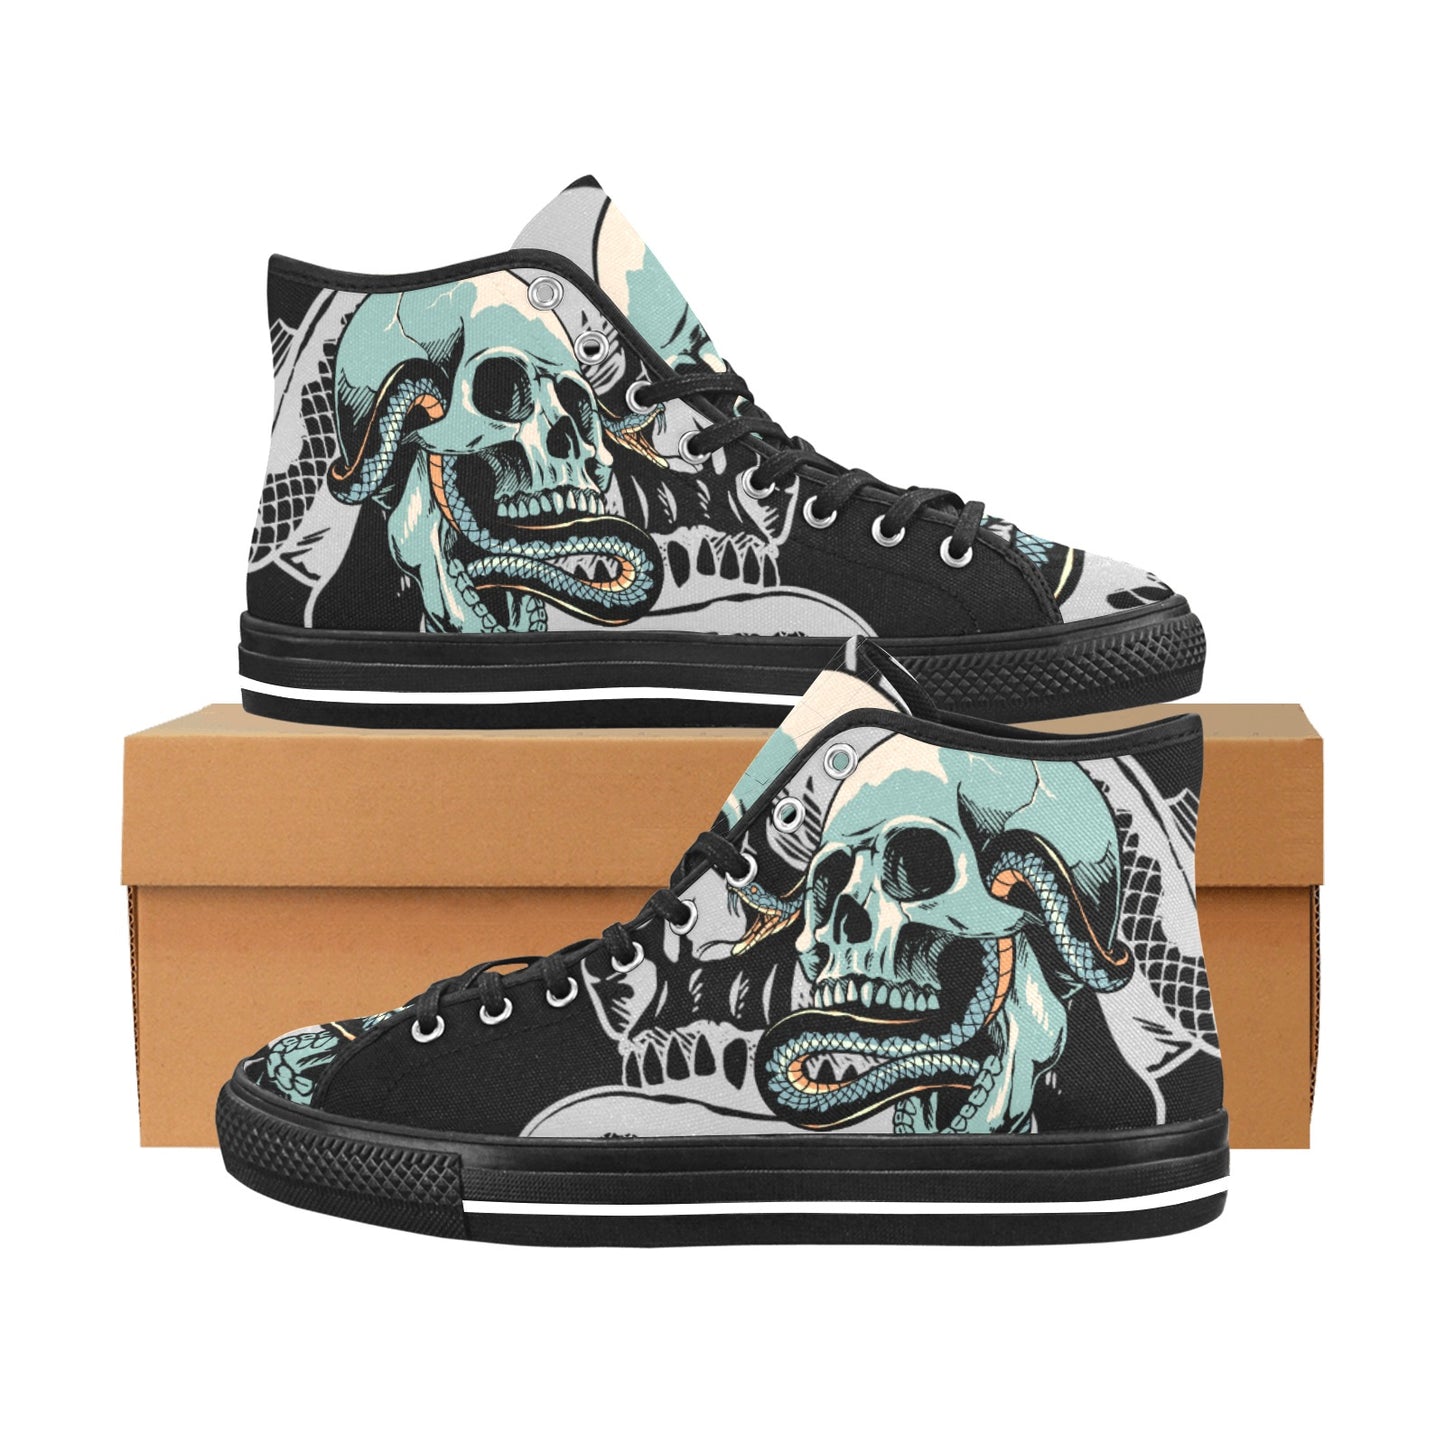 The Skull High Top Canvas Shoes